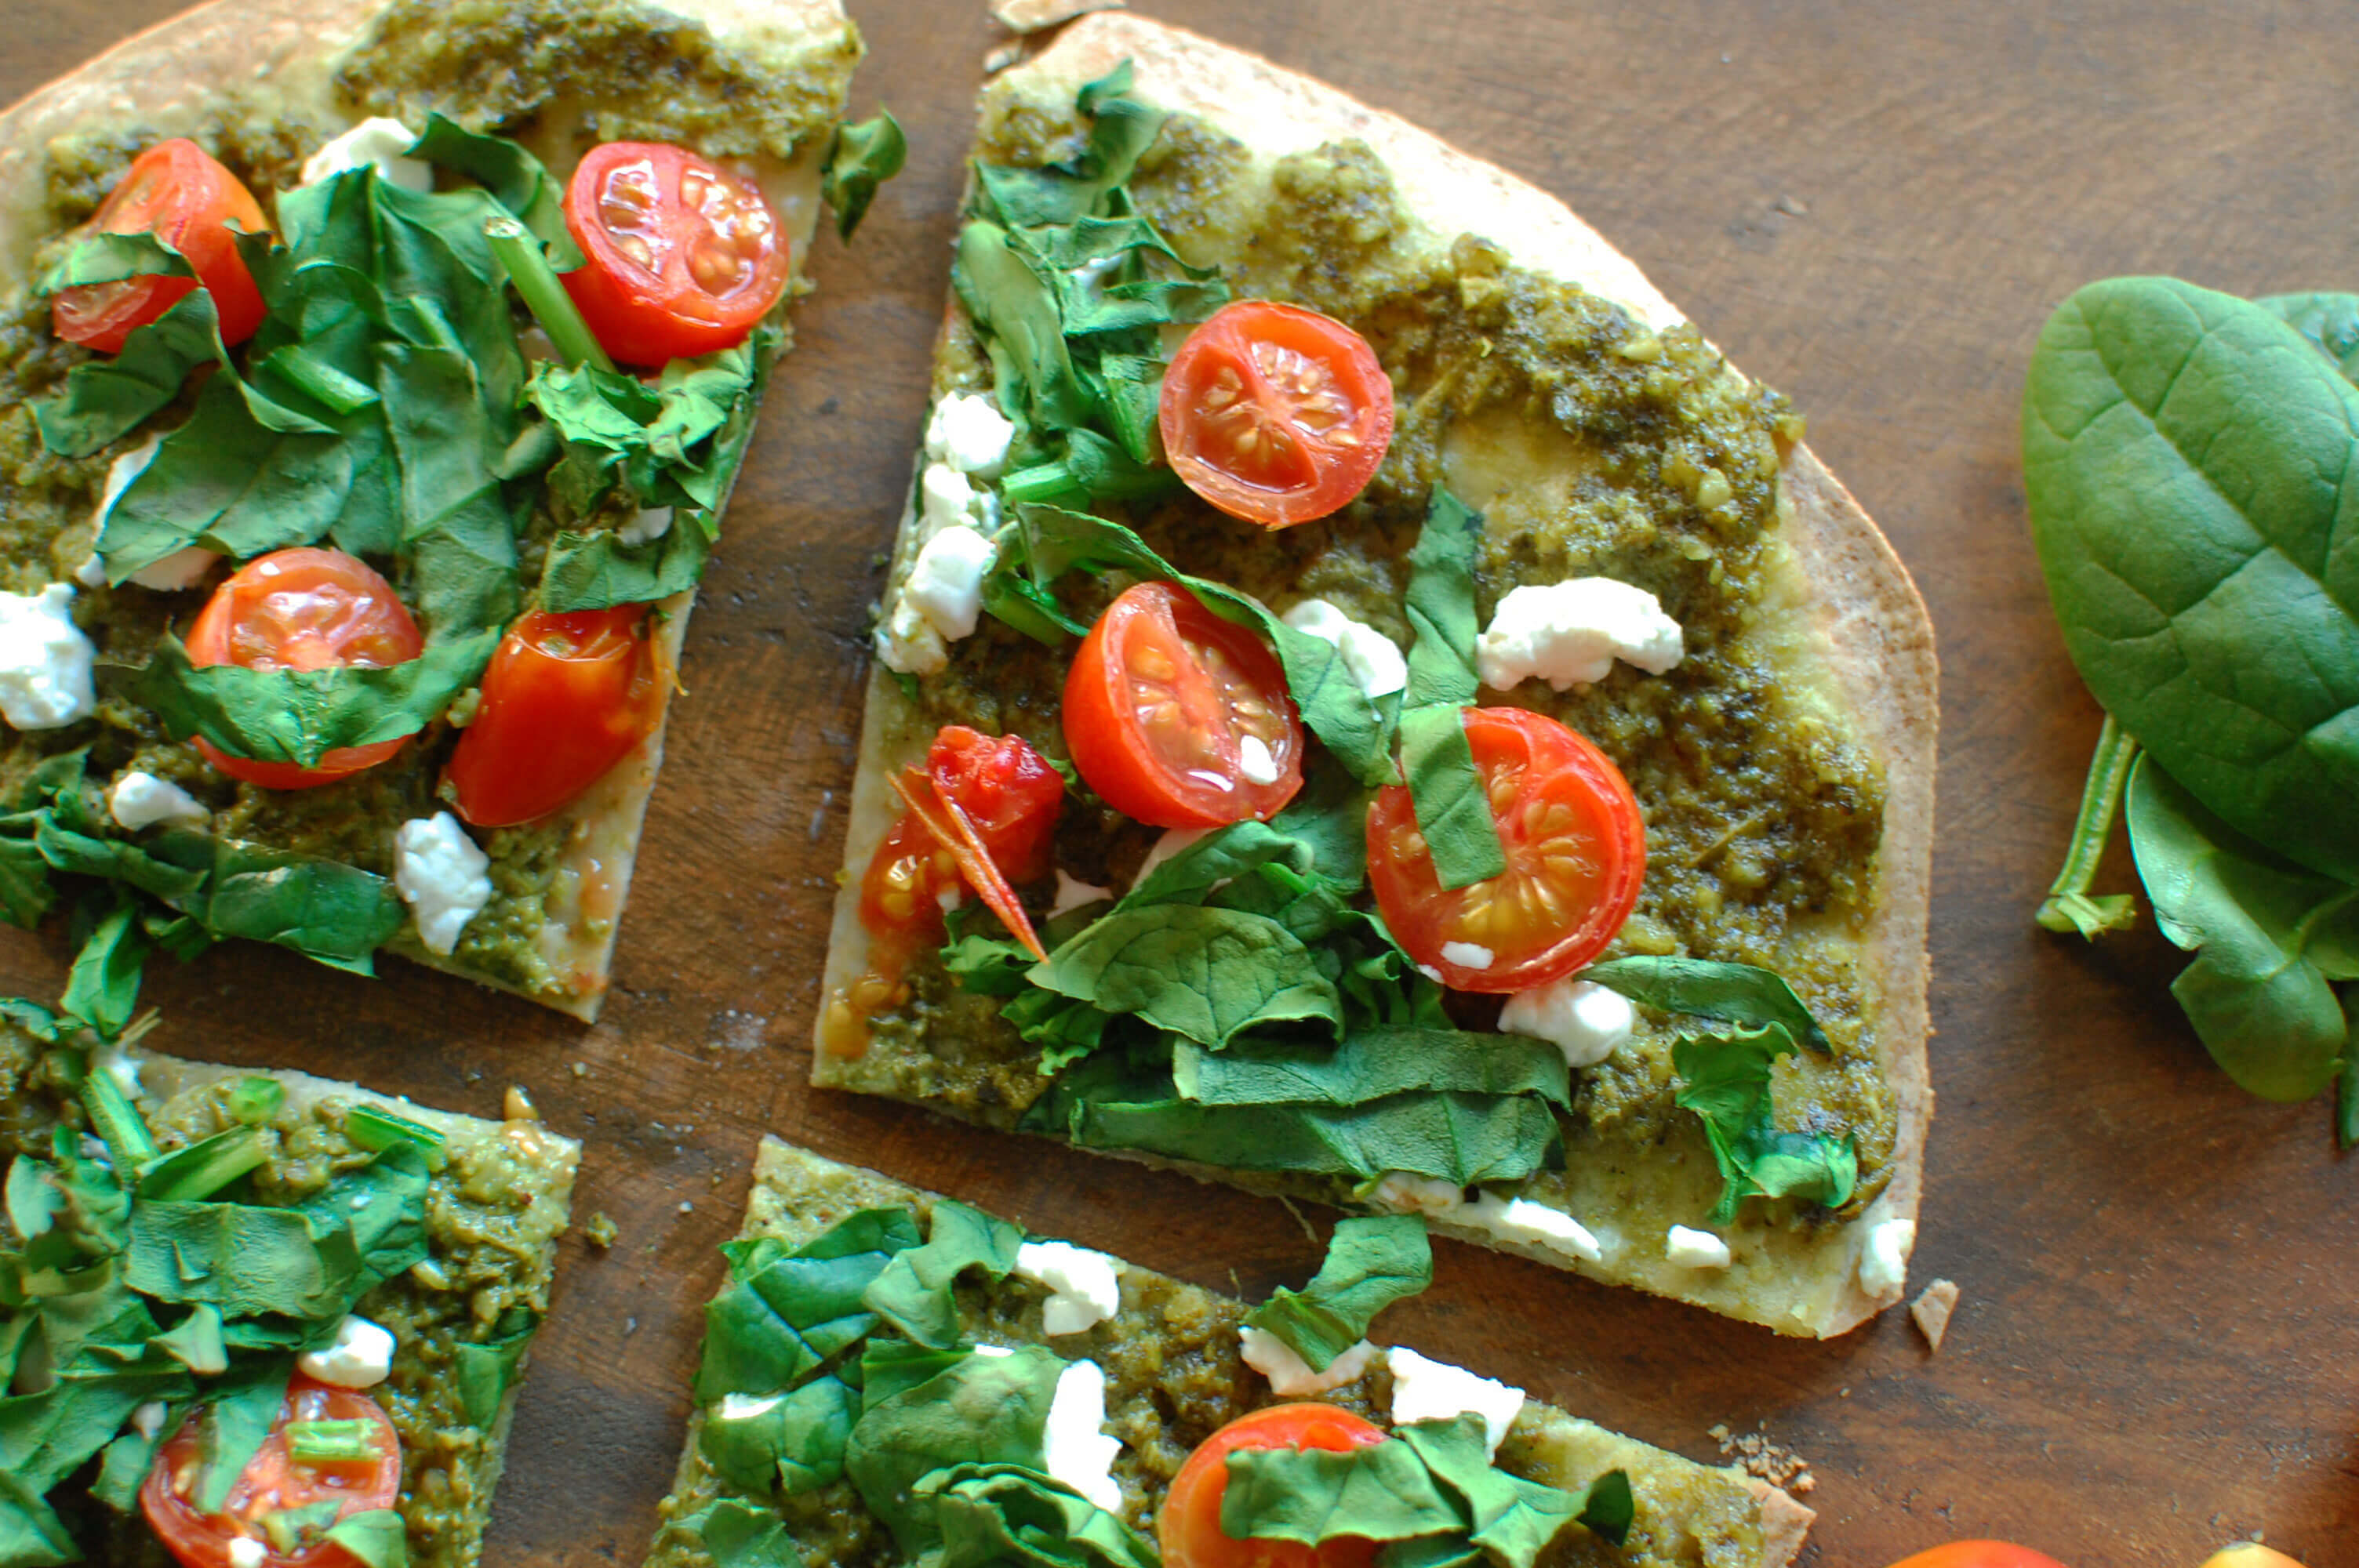 20 Family-Friendly Meals Your Clients Will Love: Spinach, Tomato & Goat Cheese Pizza